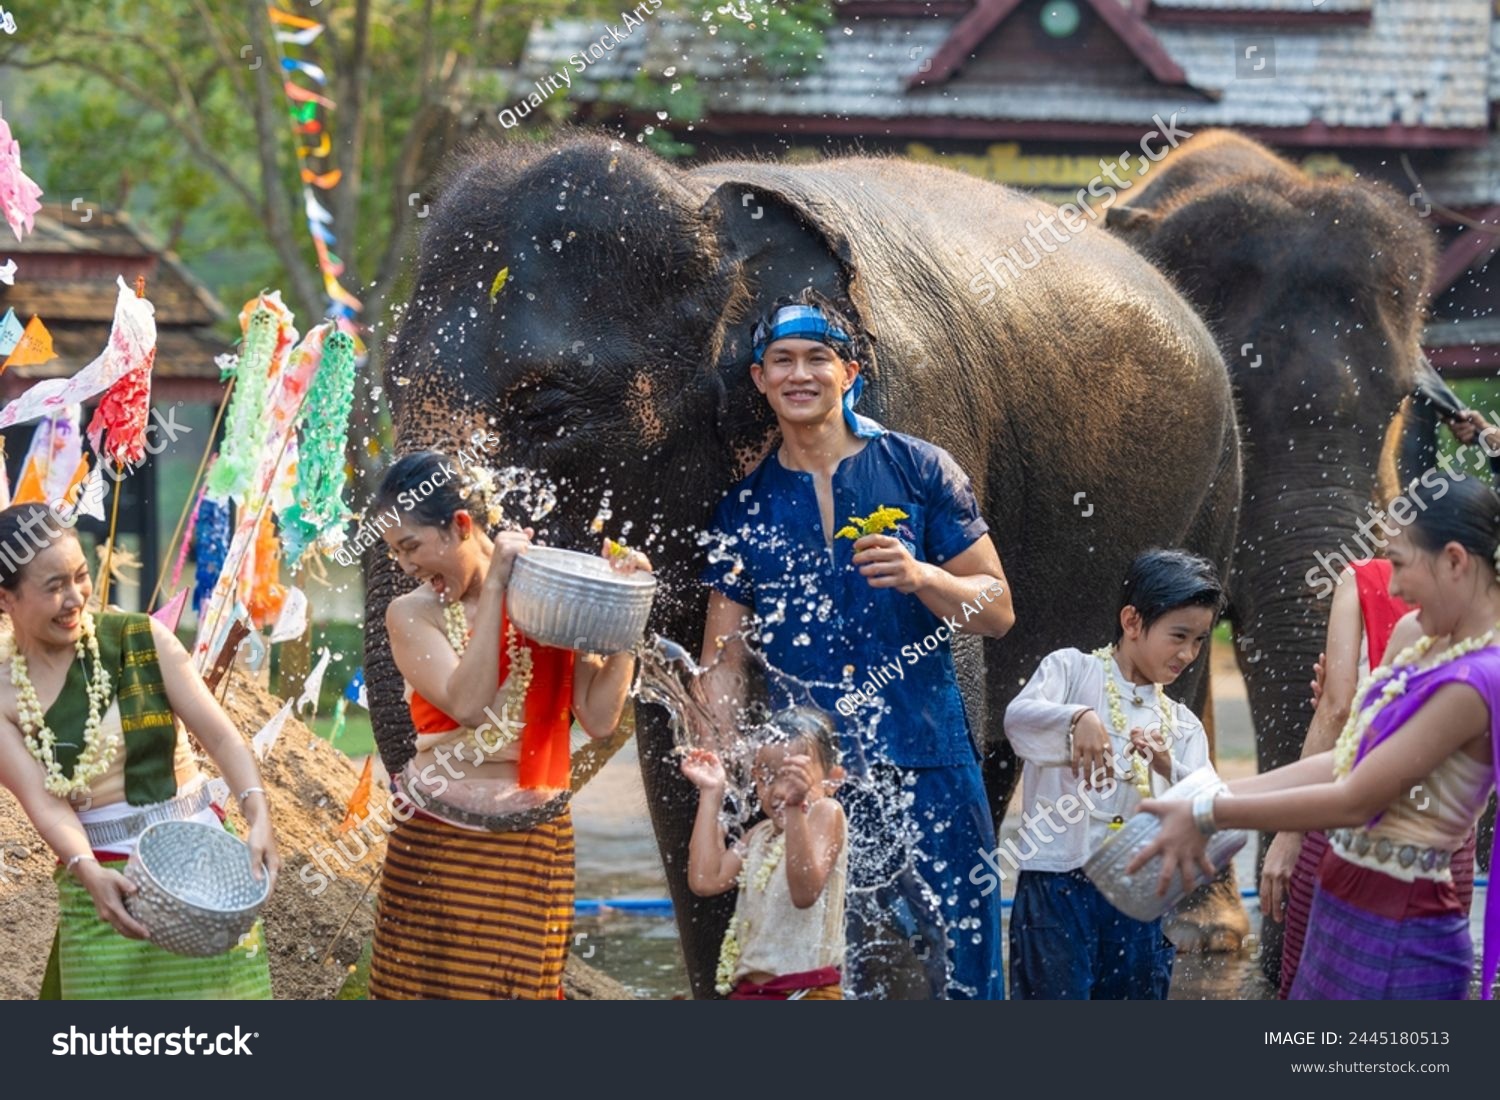 Songkran festival. Northern Thai people in Traditional clothes dressing splashing water together in Songkran day cultural festival with elephant background. #2445180513